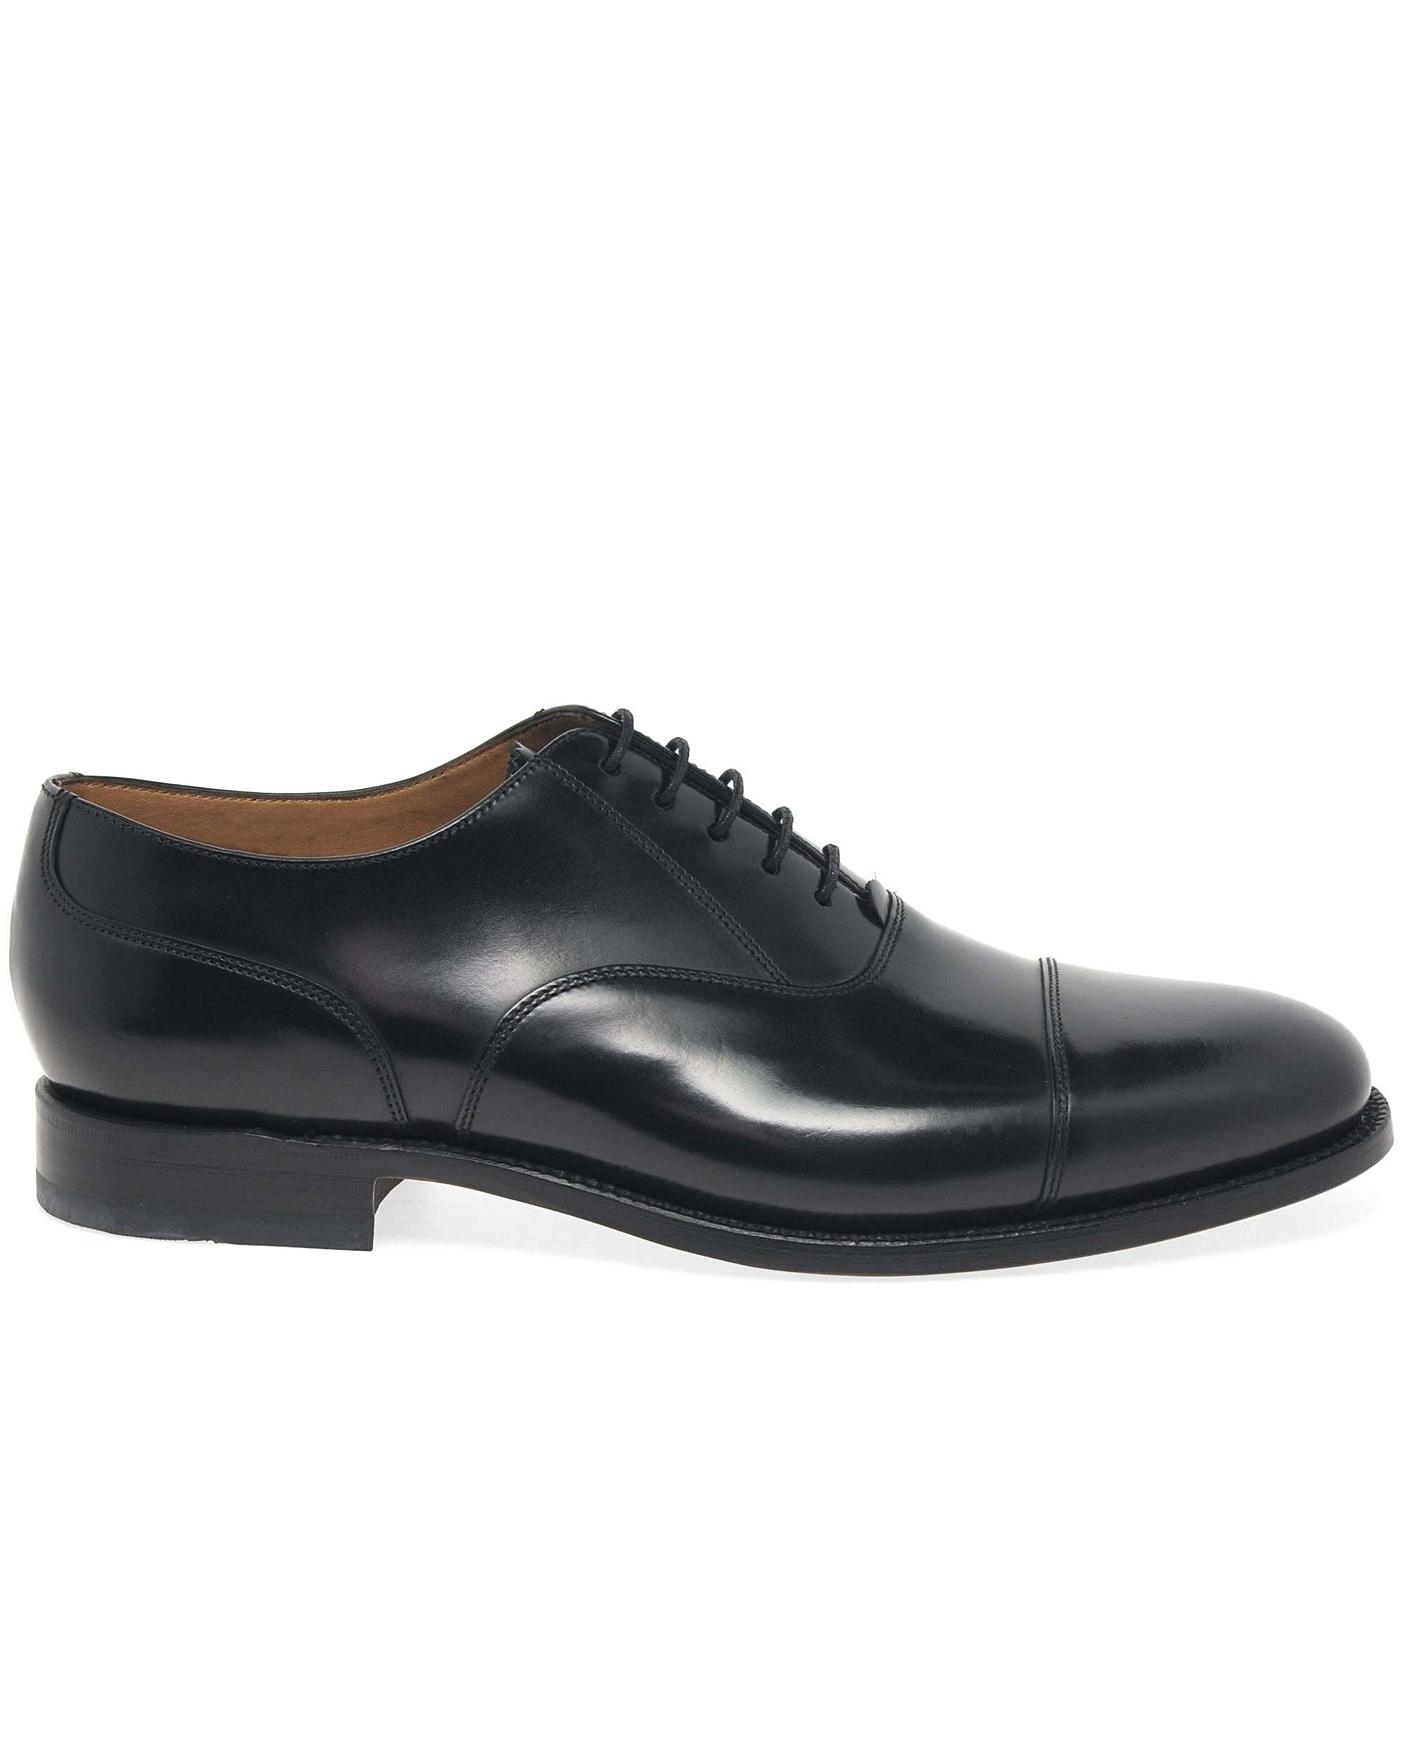 200B Mens Wide Fit Oxford Shoes